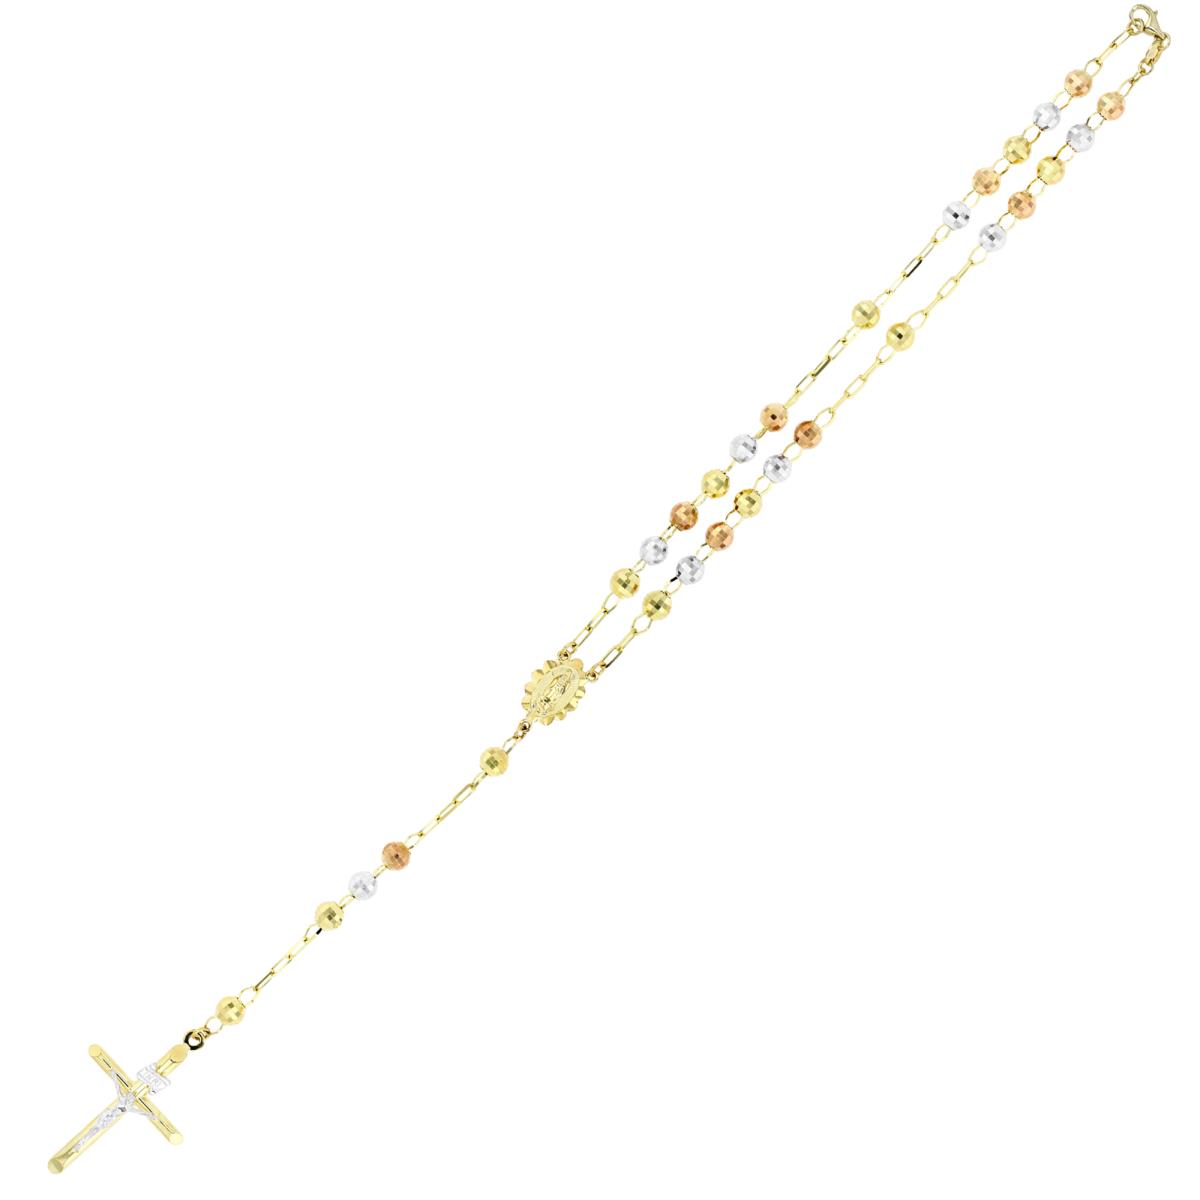 14K Gold Tricolor 6MM Diamond Cut Beads Rosary 26" Necklace